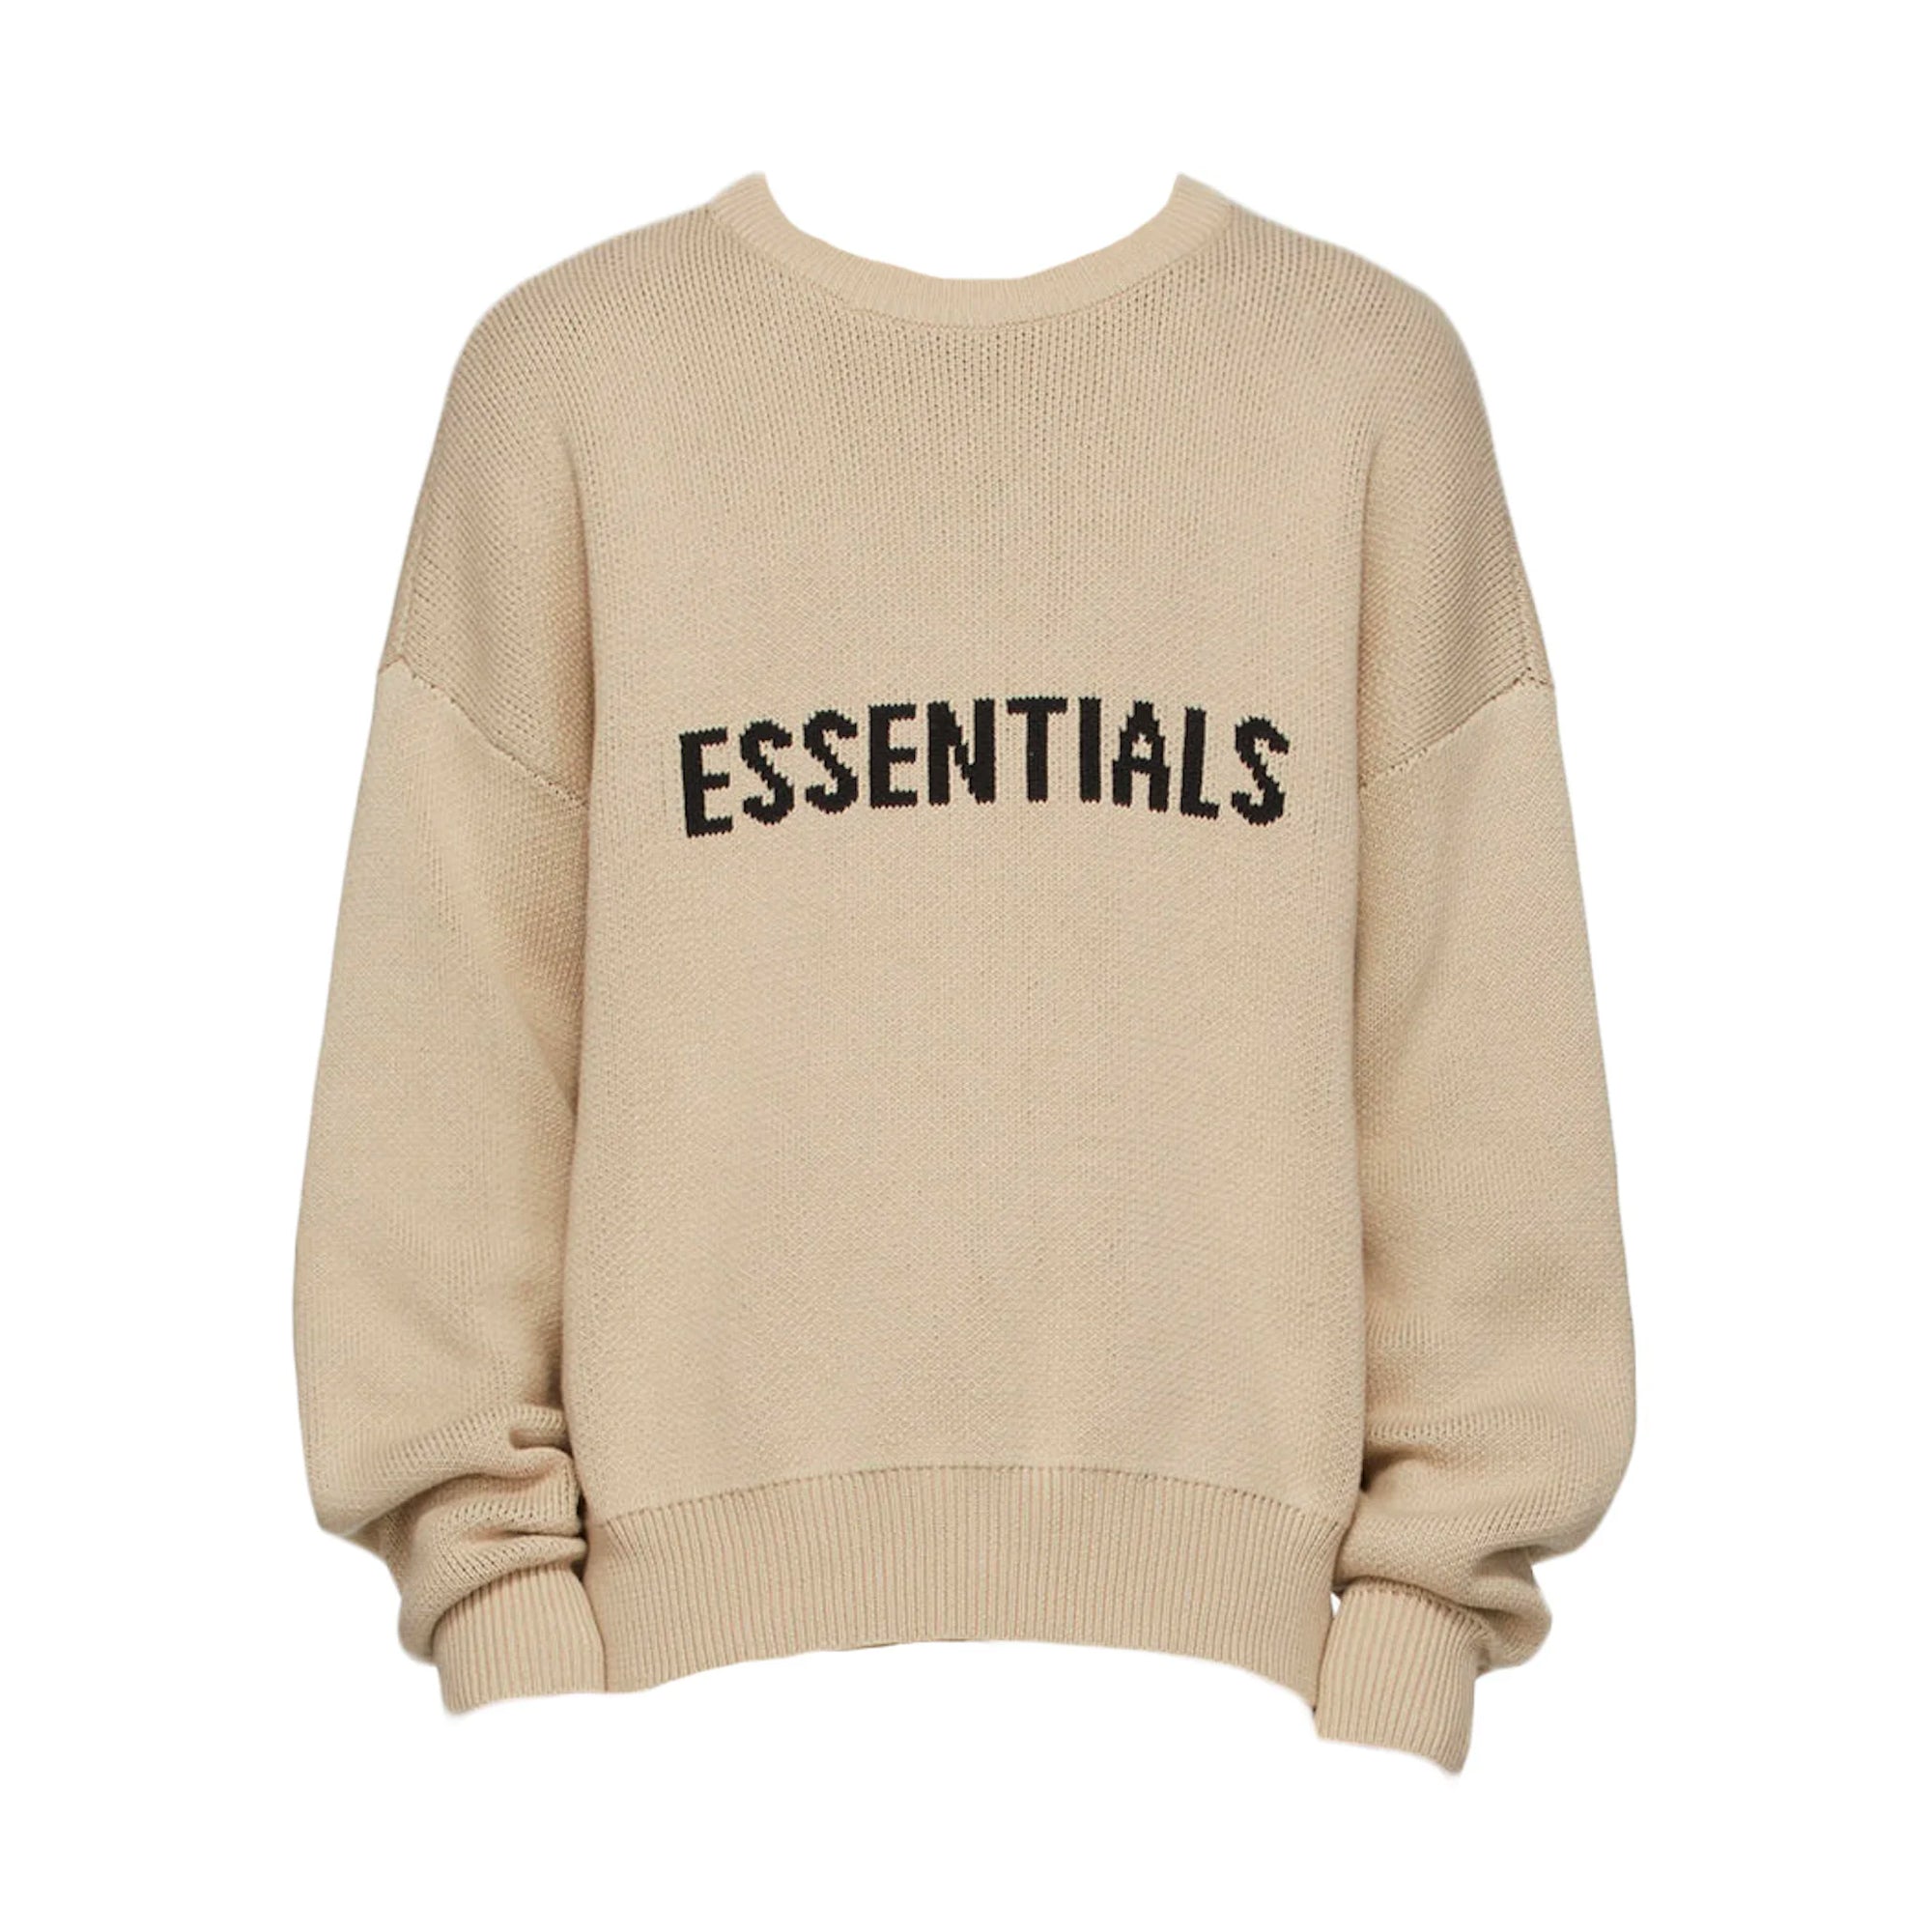 Fear of God Essentials SSENSE Exclusive Pullover Sweater Linen